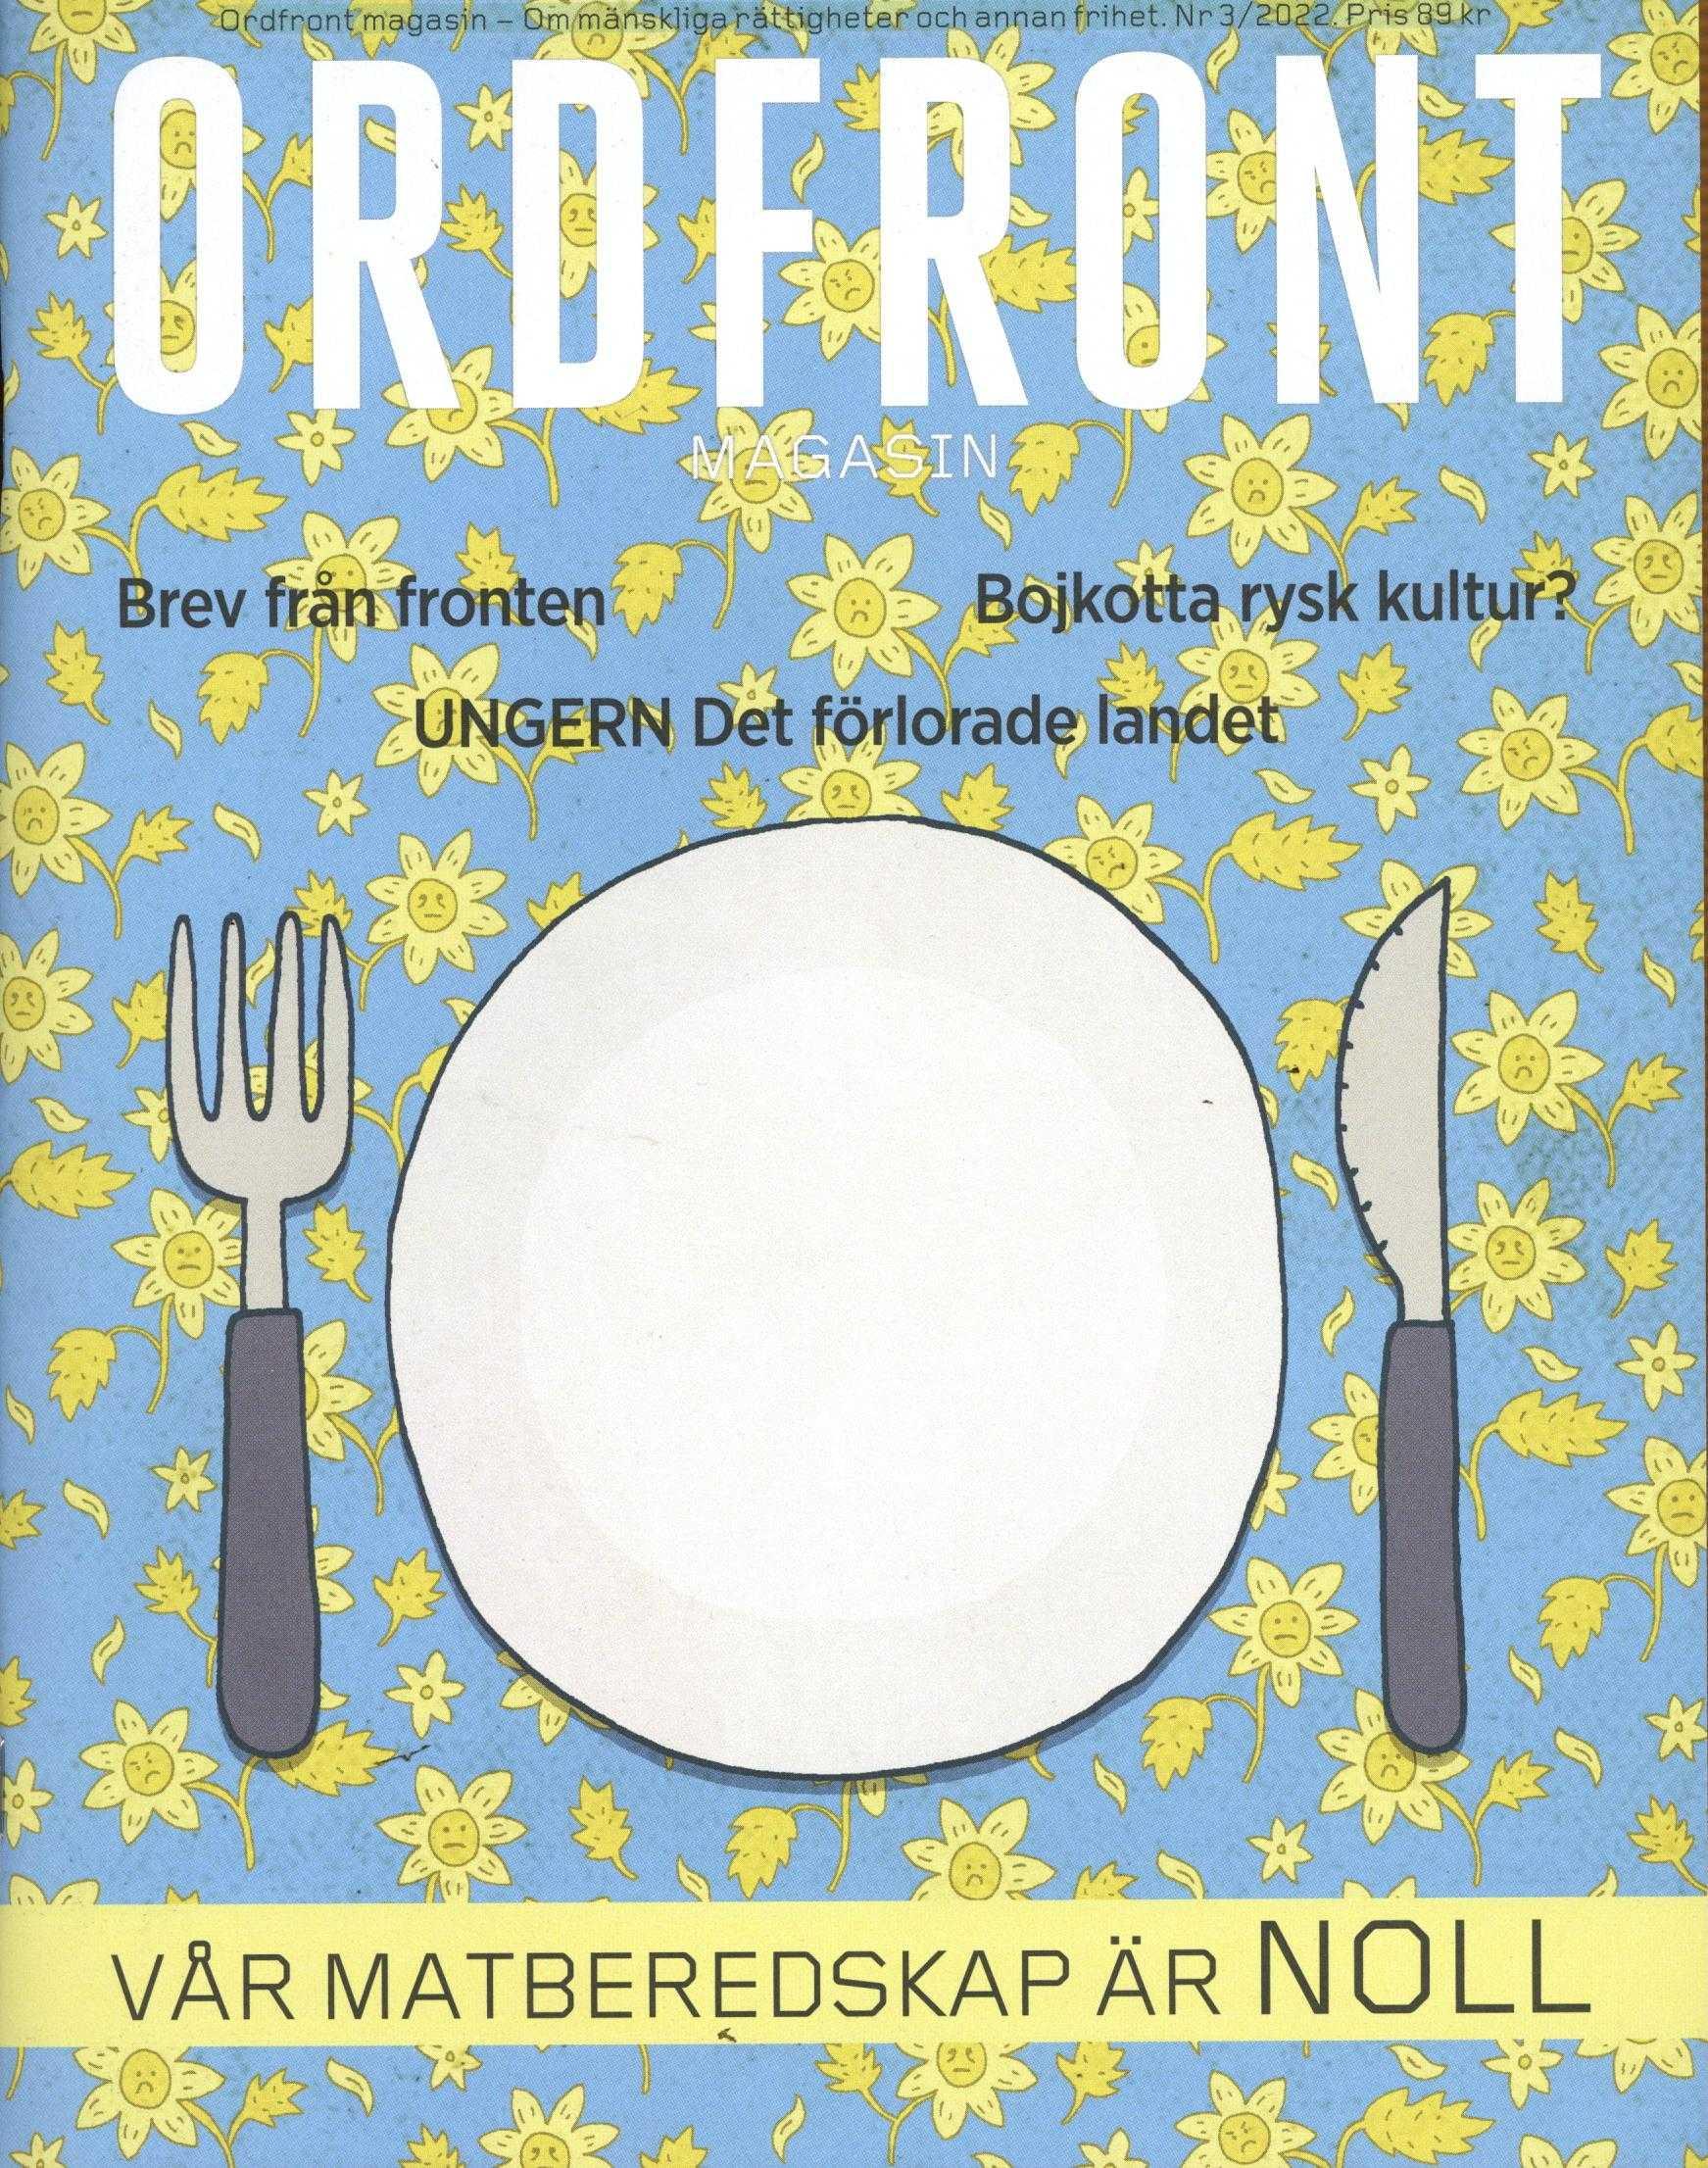 Ordfront Magasin